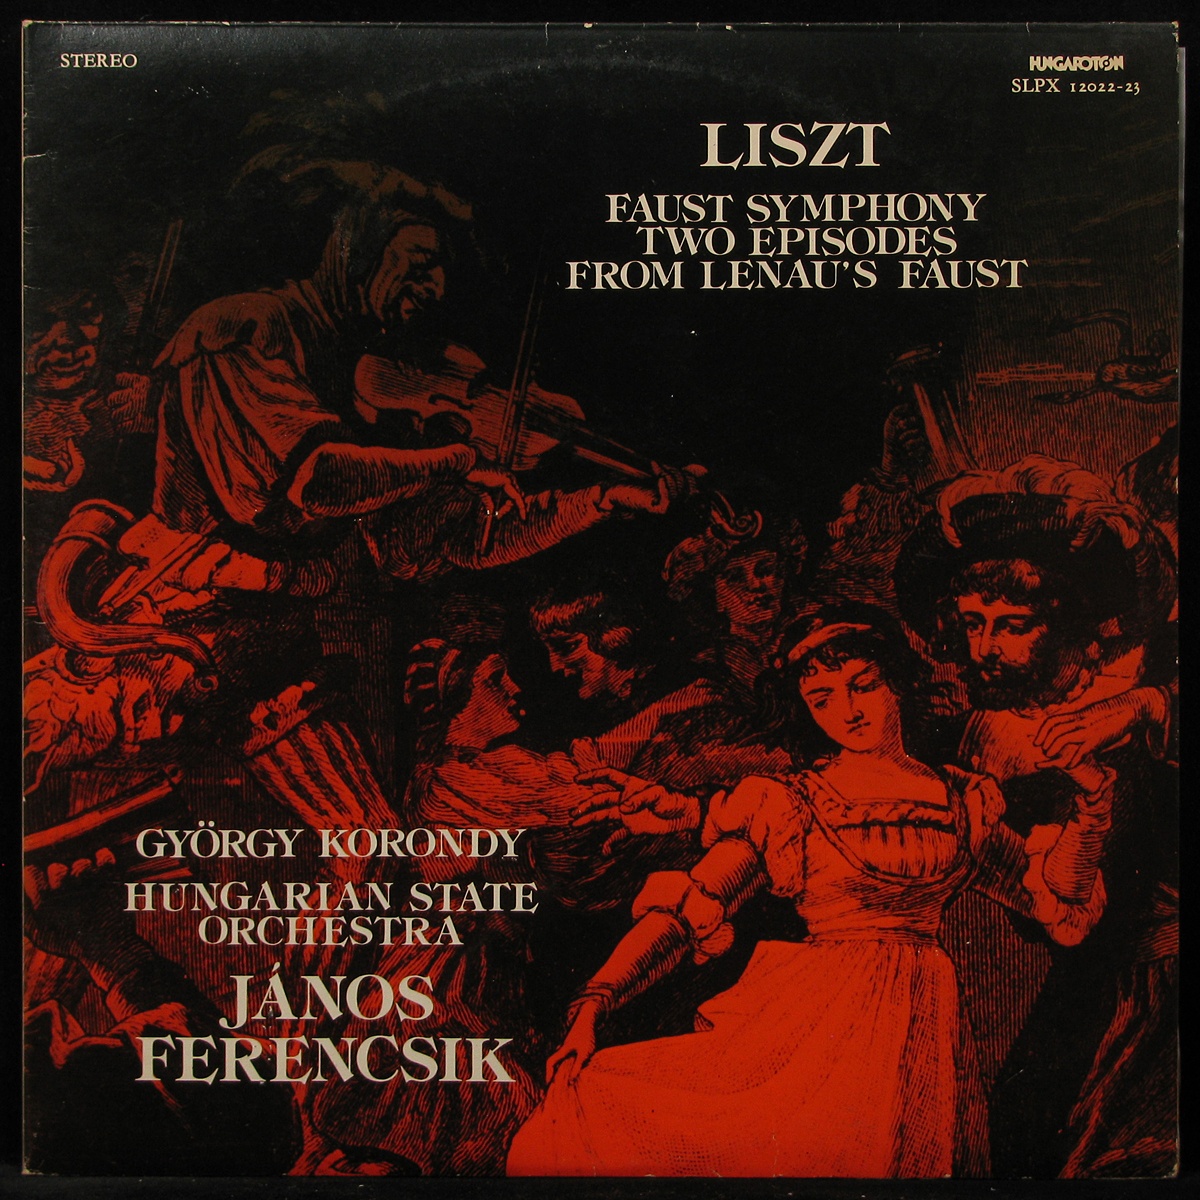 LP Gyorgy Korondy / Janos Ferencsik + V/A — Liszt: Faust Symphony / Two Episodes From Lenau's Faust (2LP) фото